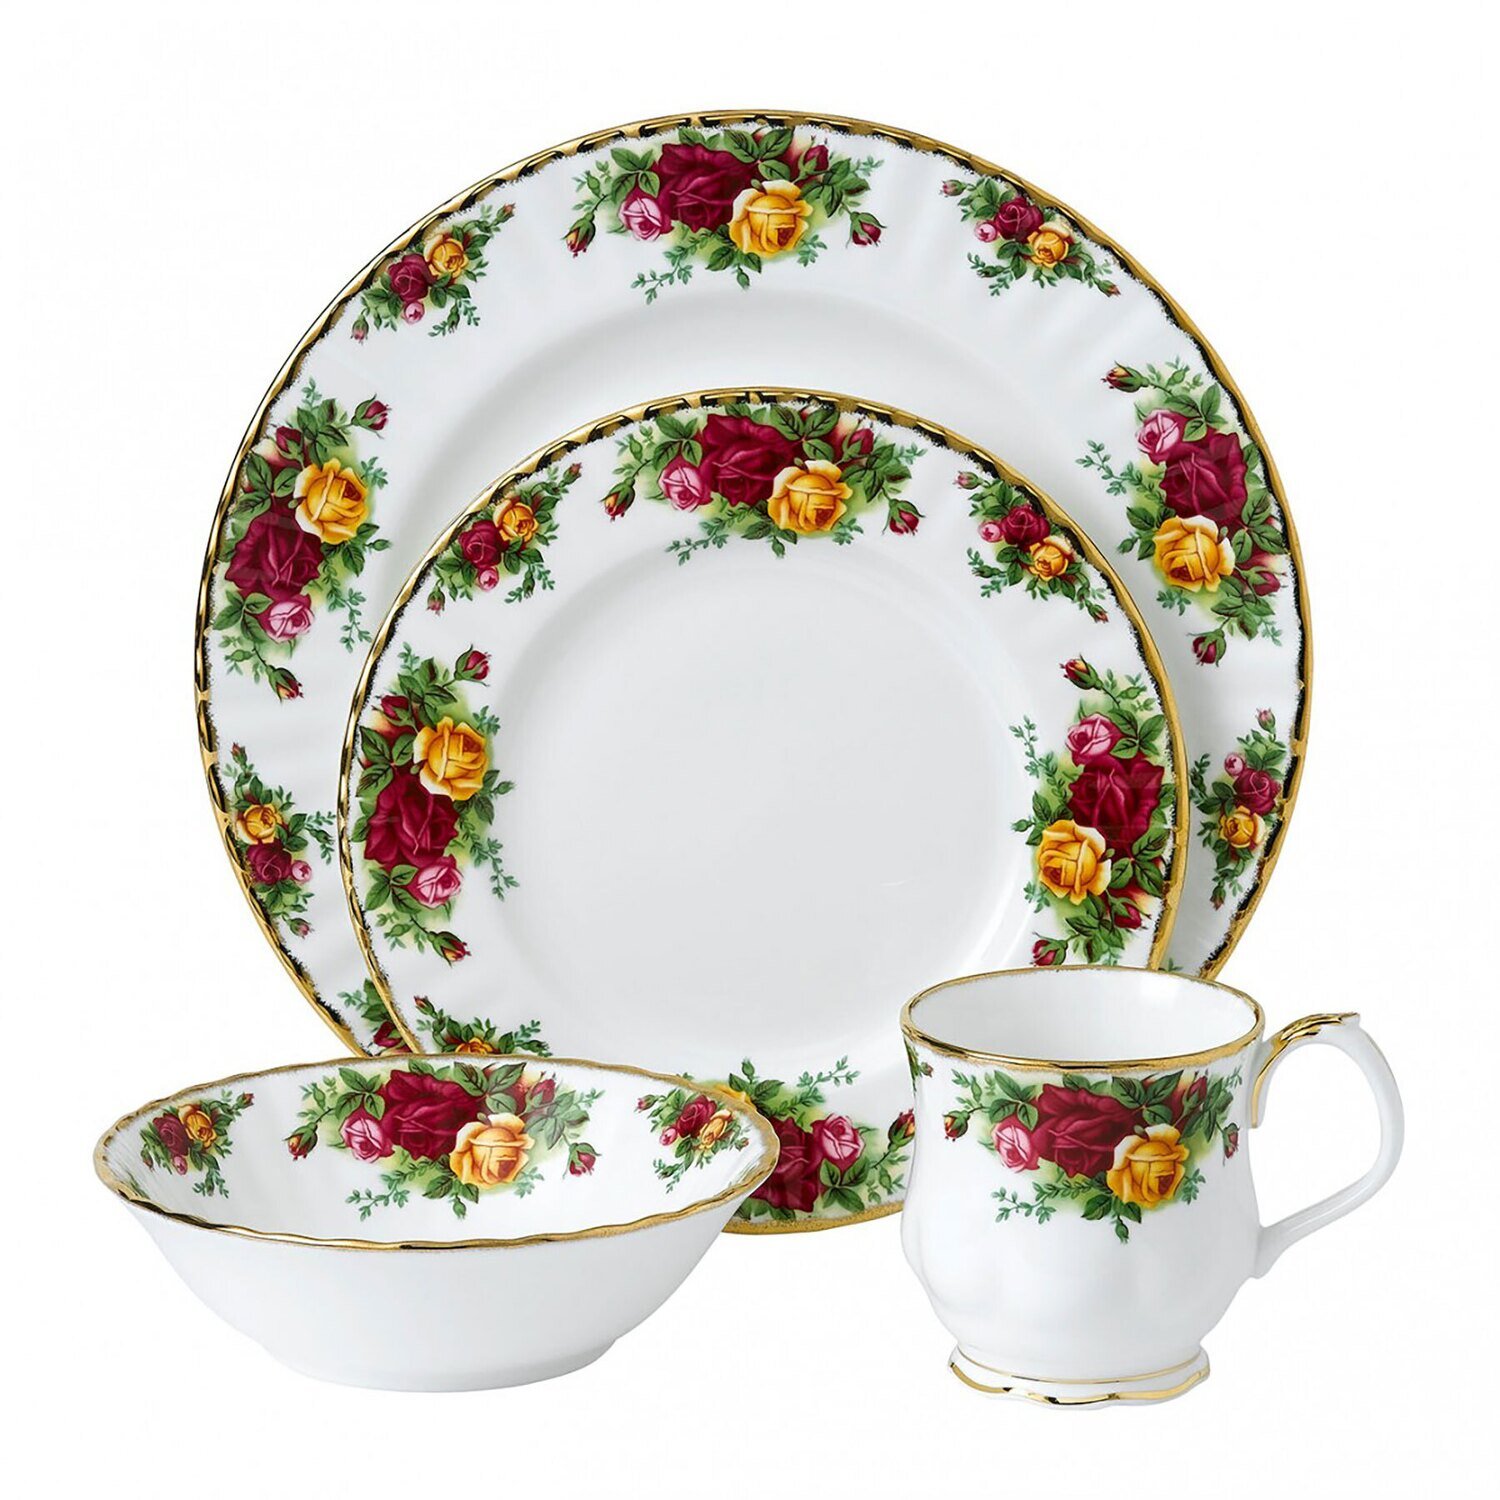 Royal Albert Old Country Roses 4-Piece Place Setting 1051425